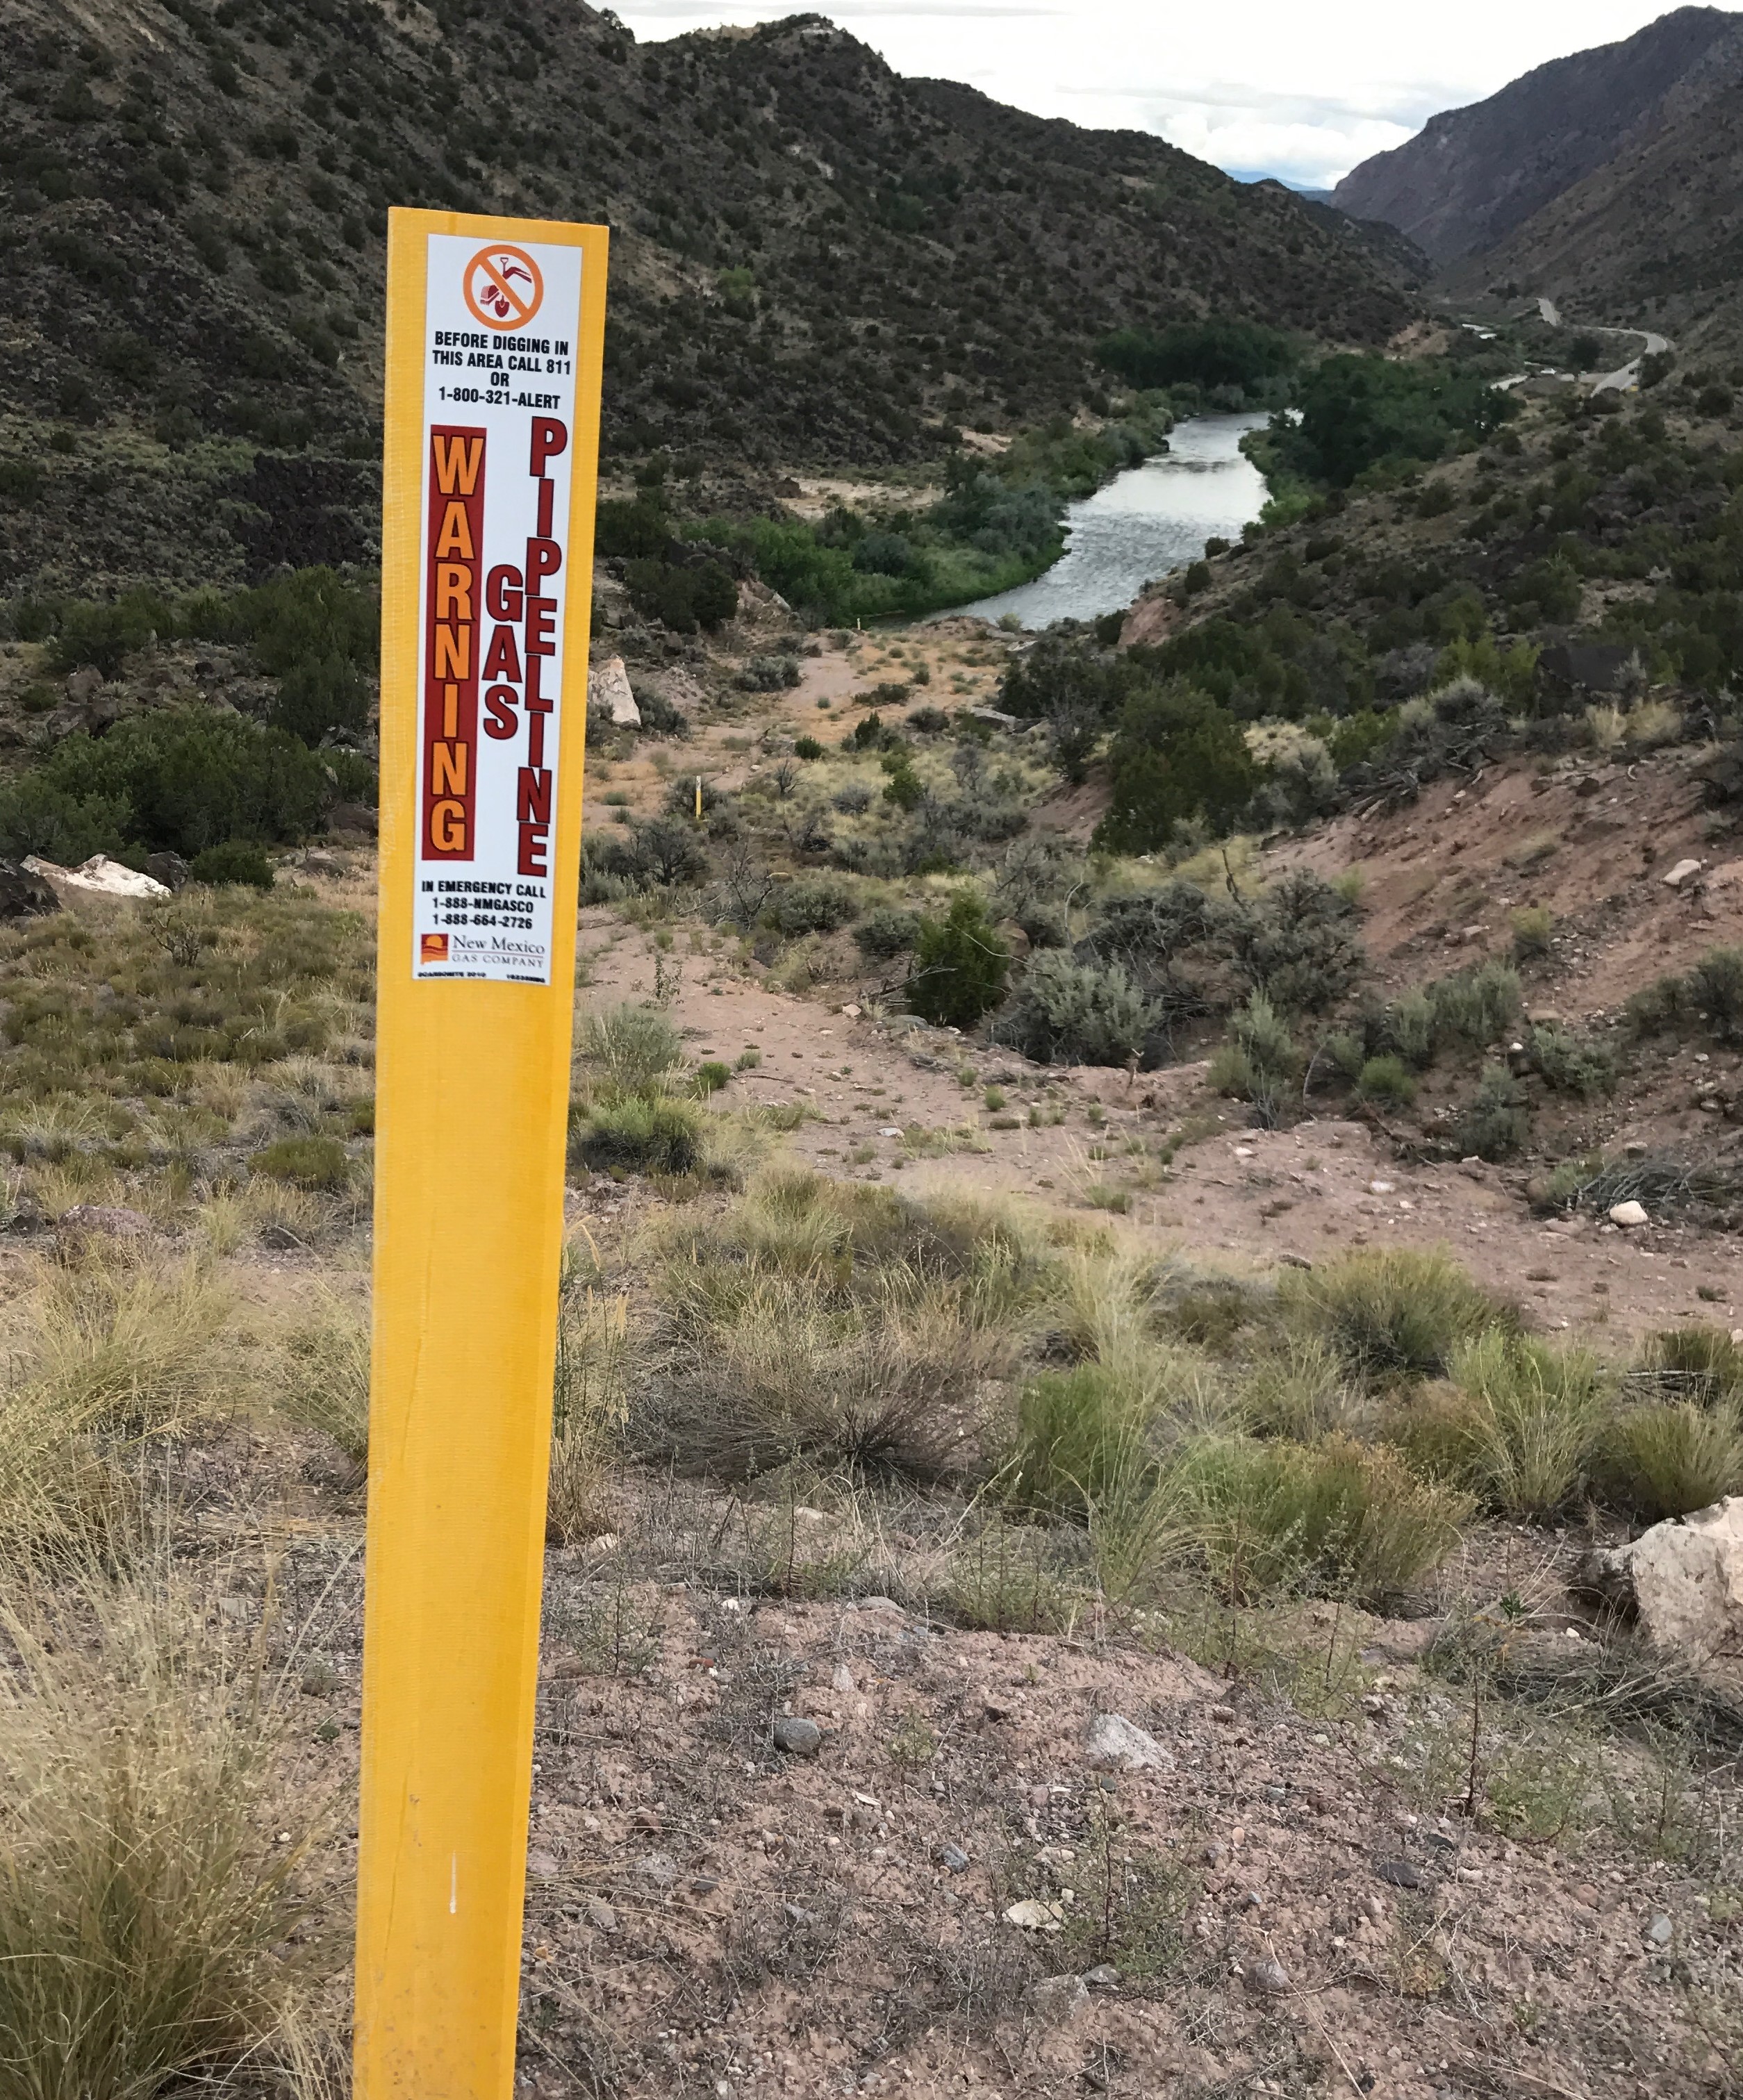 A yellow pipeline marker.